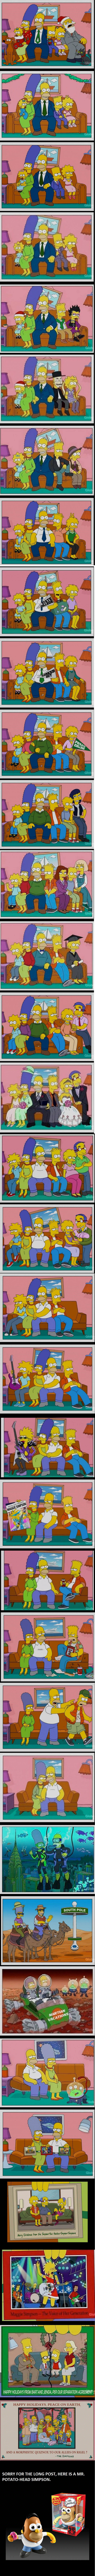 a collection of simpsons couch scenes